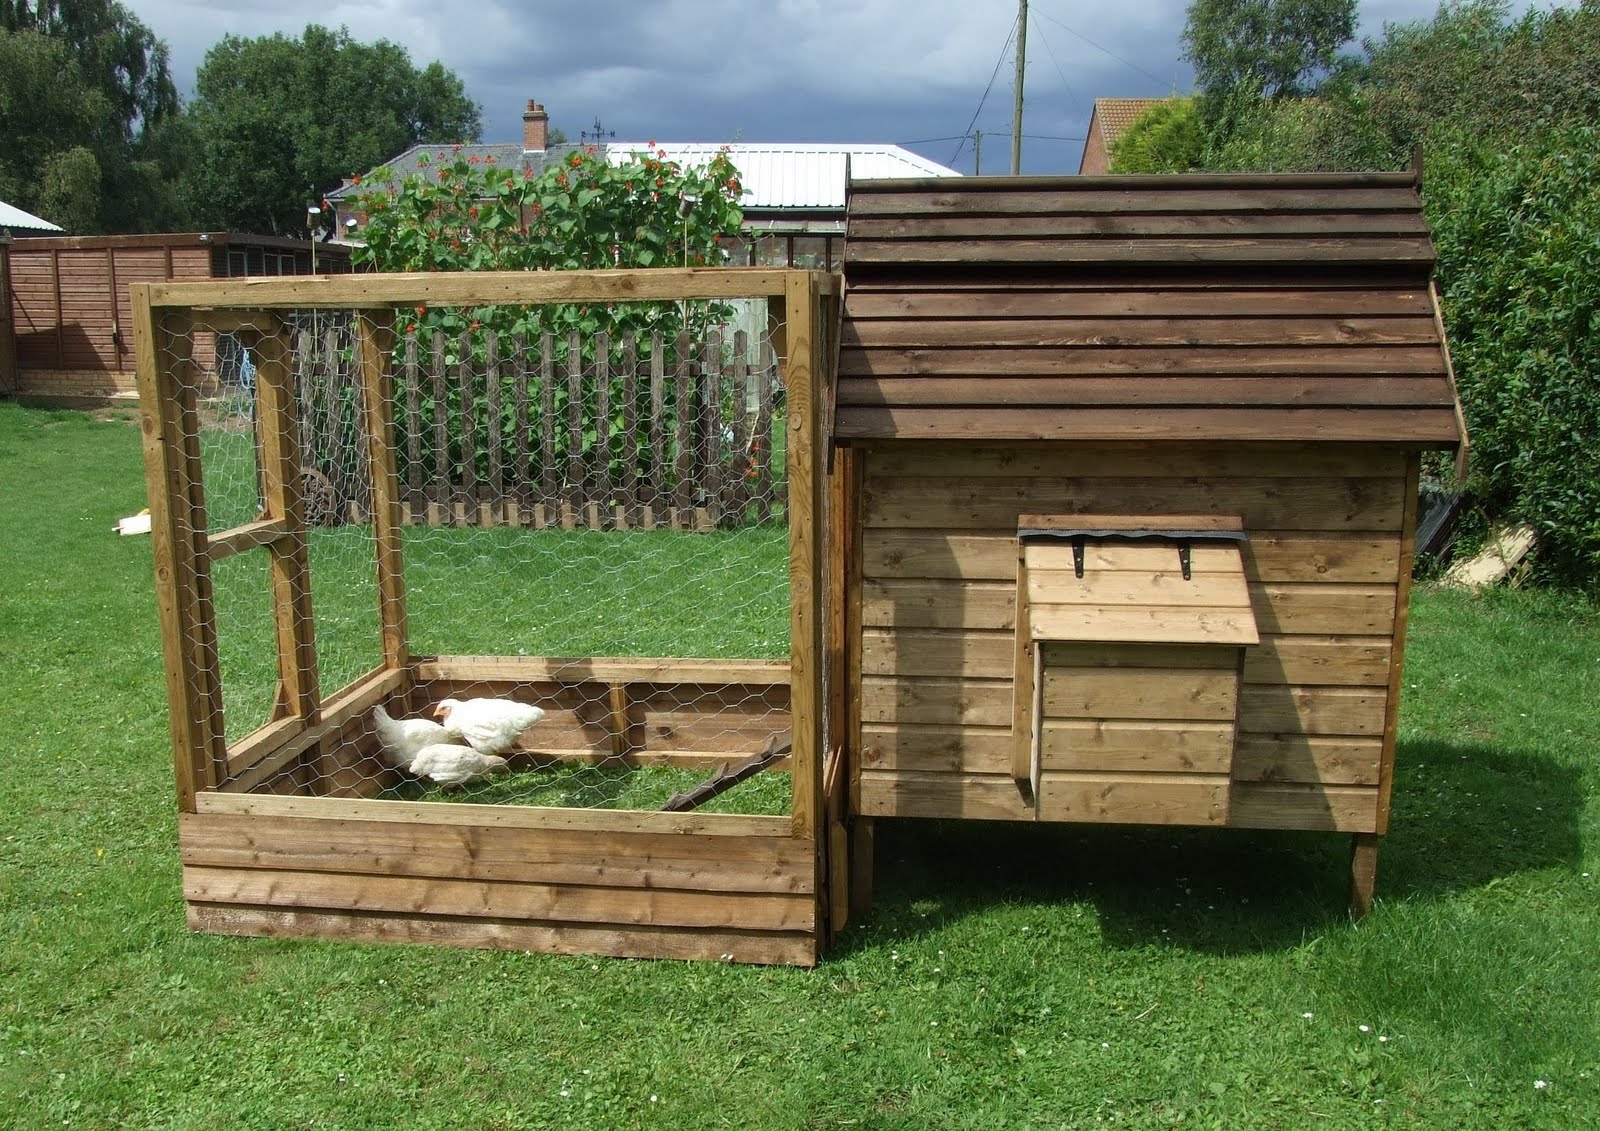 Shimmering Gold Fields: A chicken coop for your chicks - Coop1